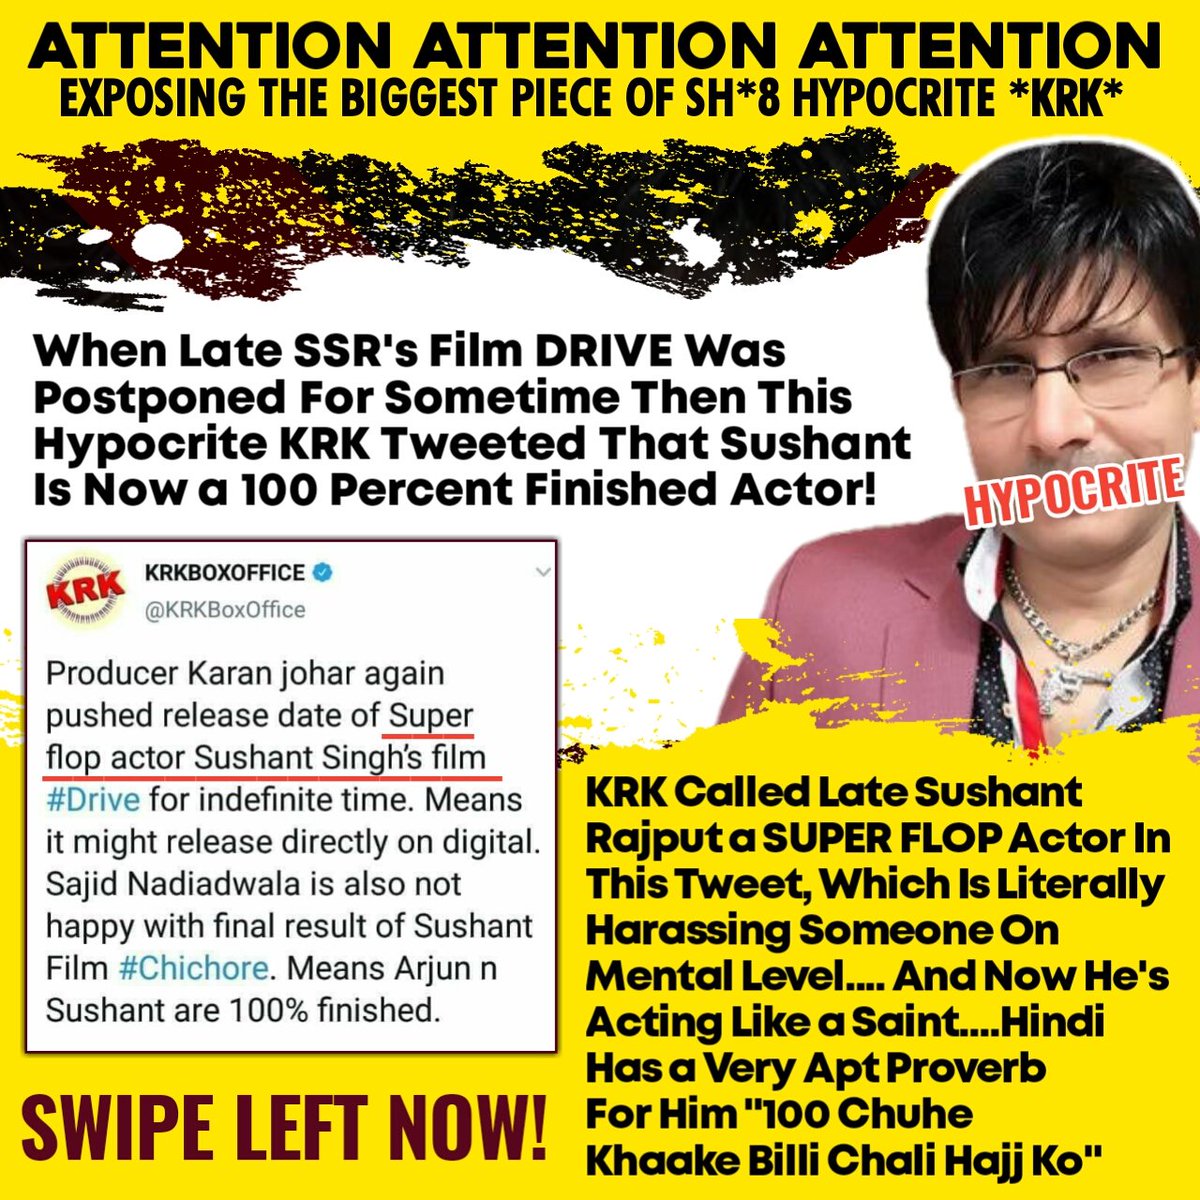 EXPOSING KRK - 3When SSR's Movie DRIVE Was Postponed For Sometime Then This Man Shamelessly Tweeted That Now Sushant is a 100% Finished Actor, This Is Real Mental Harassing Which KRK Was Doing!KRK Always Called Sushant Super Flop In His Tweets #FakeKRKRealCulpritOfSushant